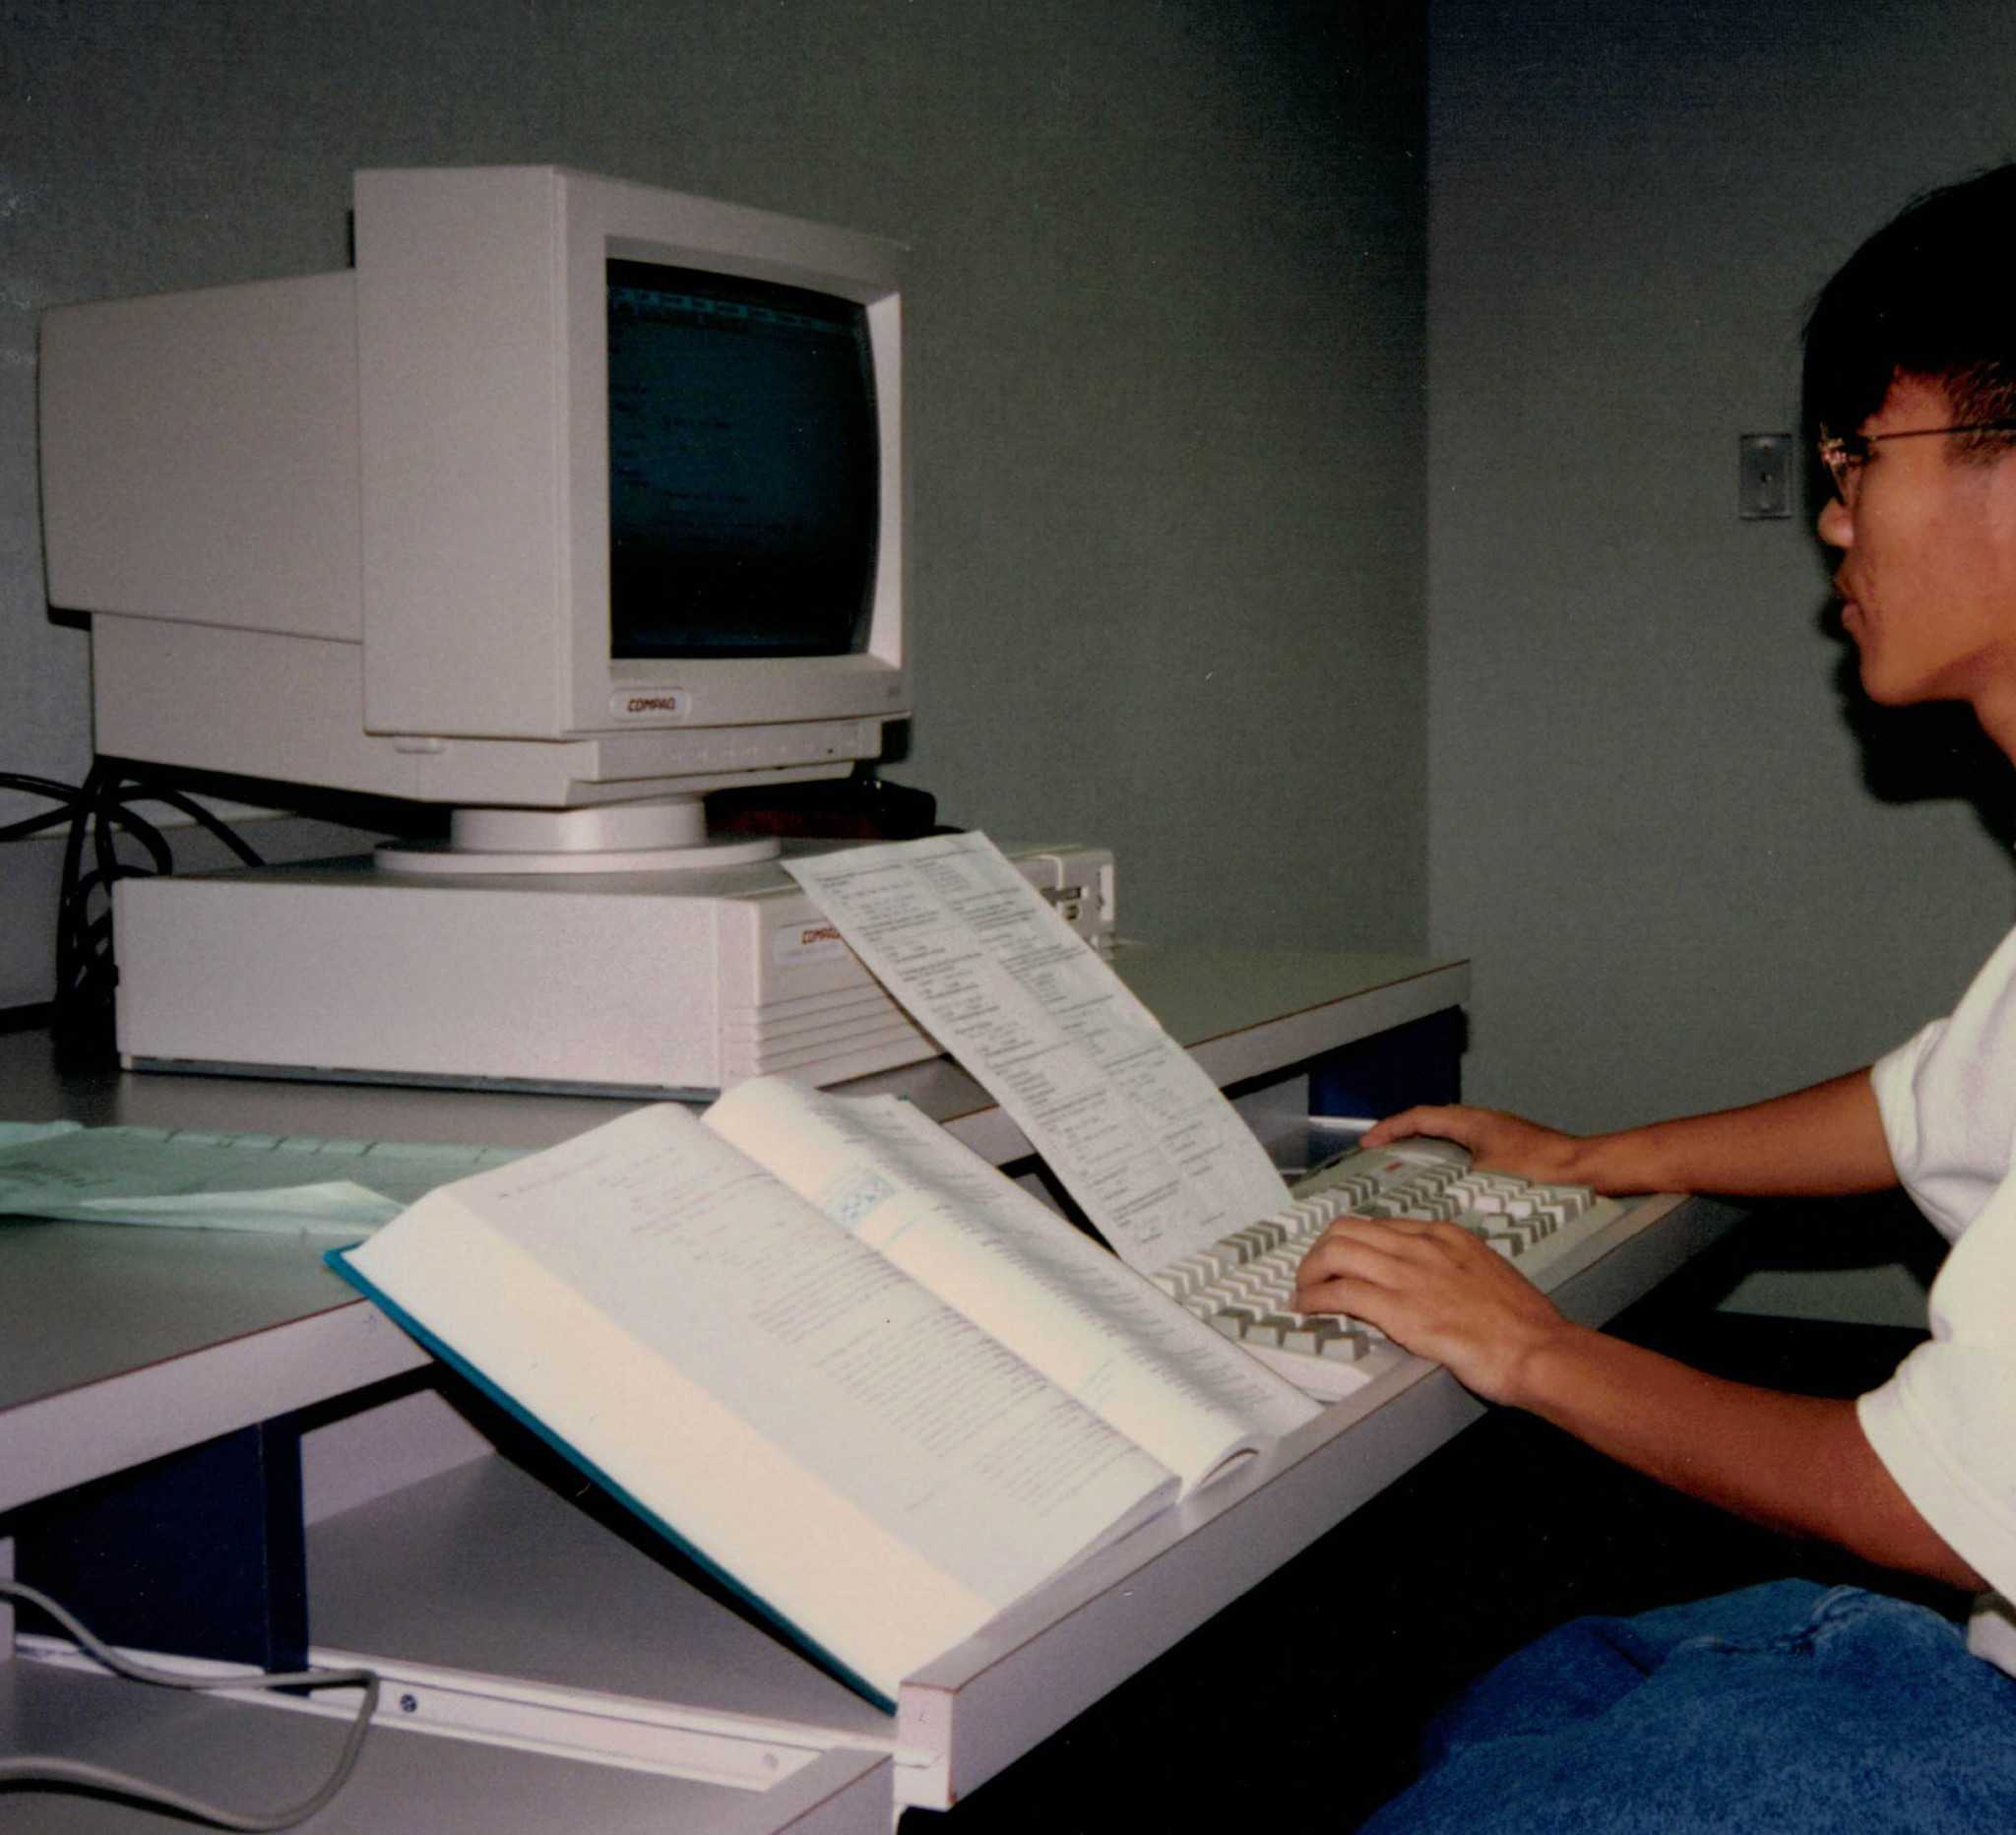 In the late 90's and early 2000's, Kerr students had to use small, box computers to research for their PAKs